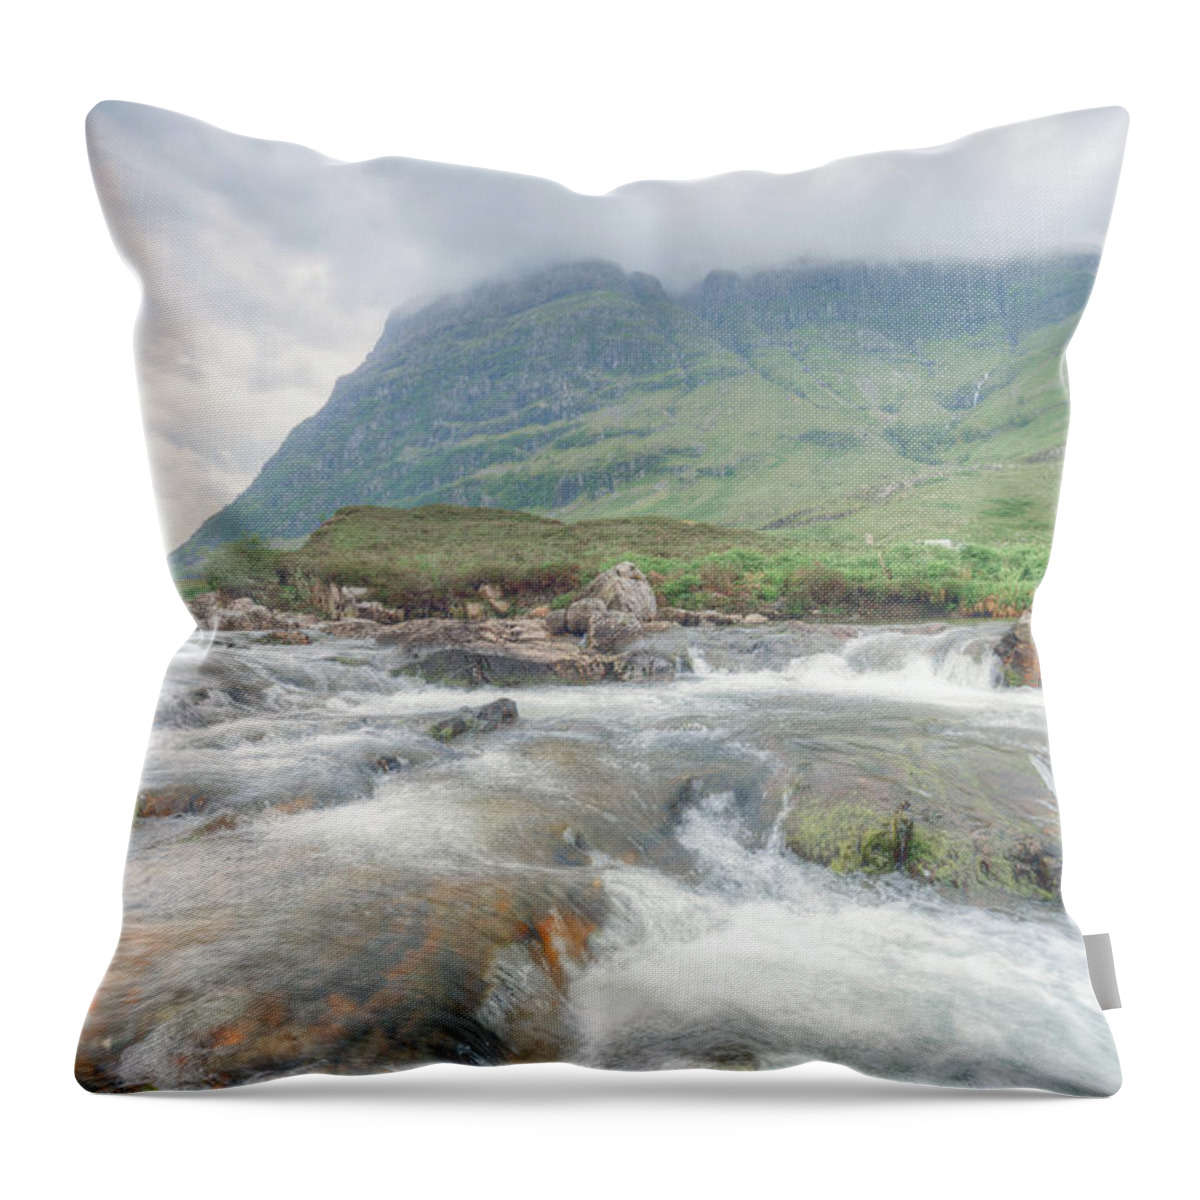 River Throw Pillow featuring the photograph River Coe by Ray Devlin